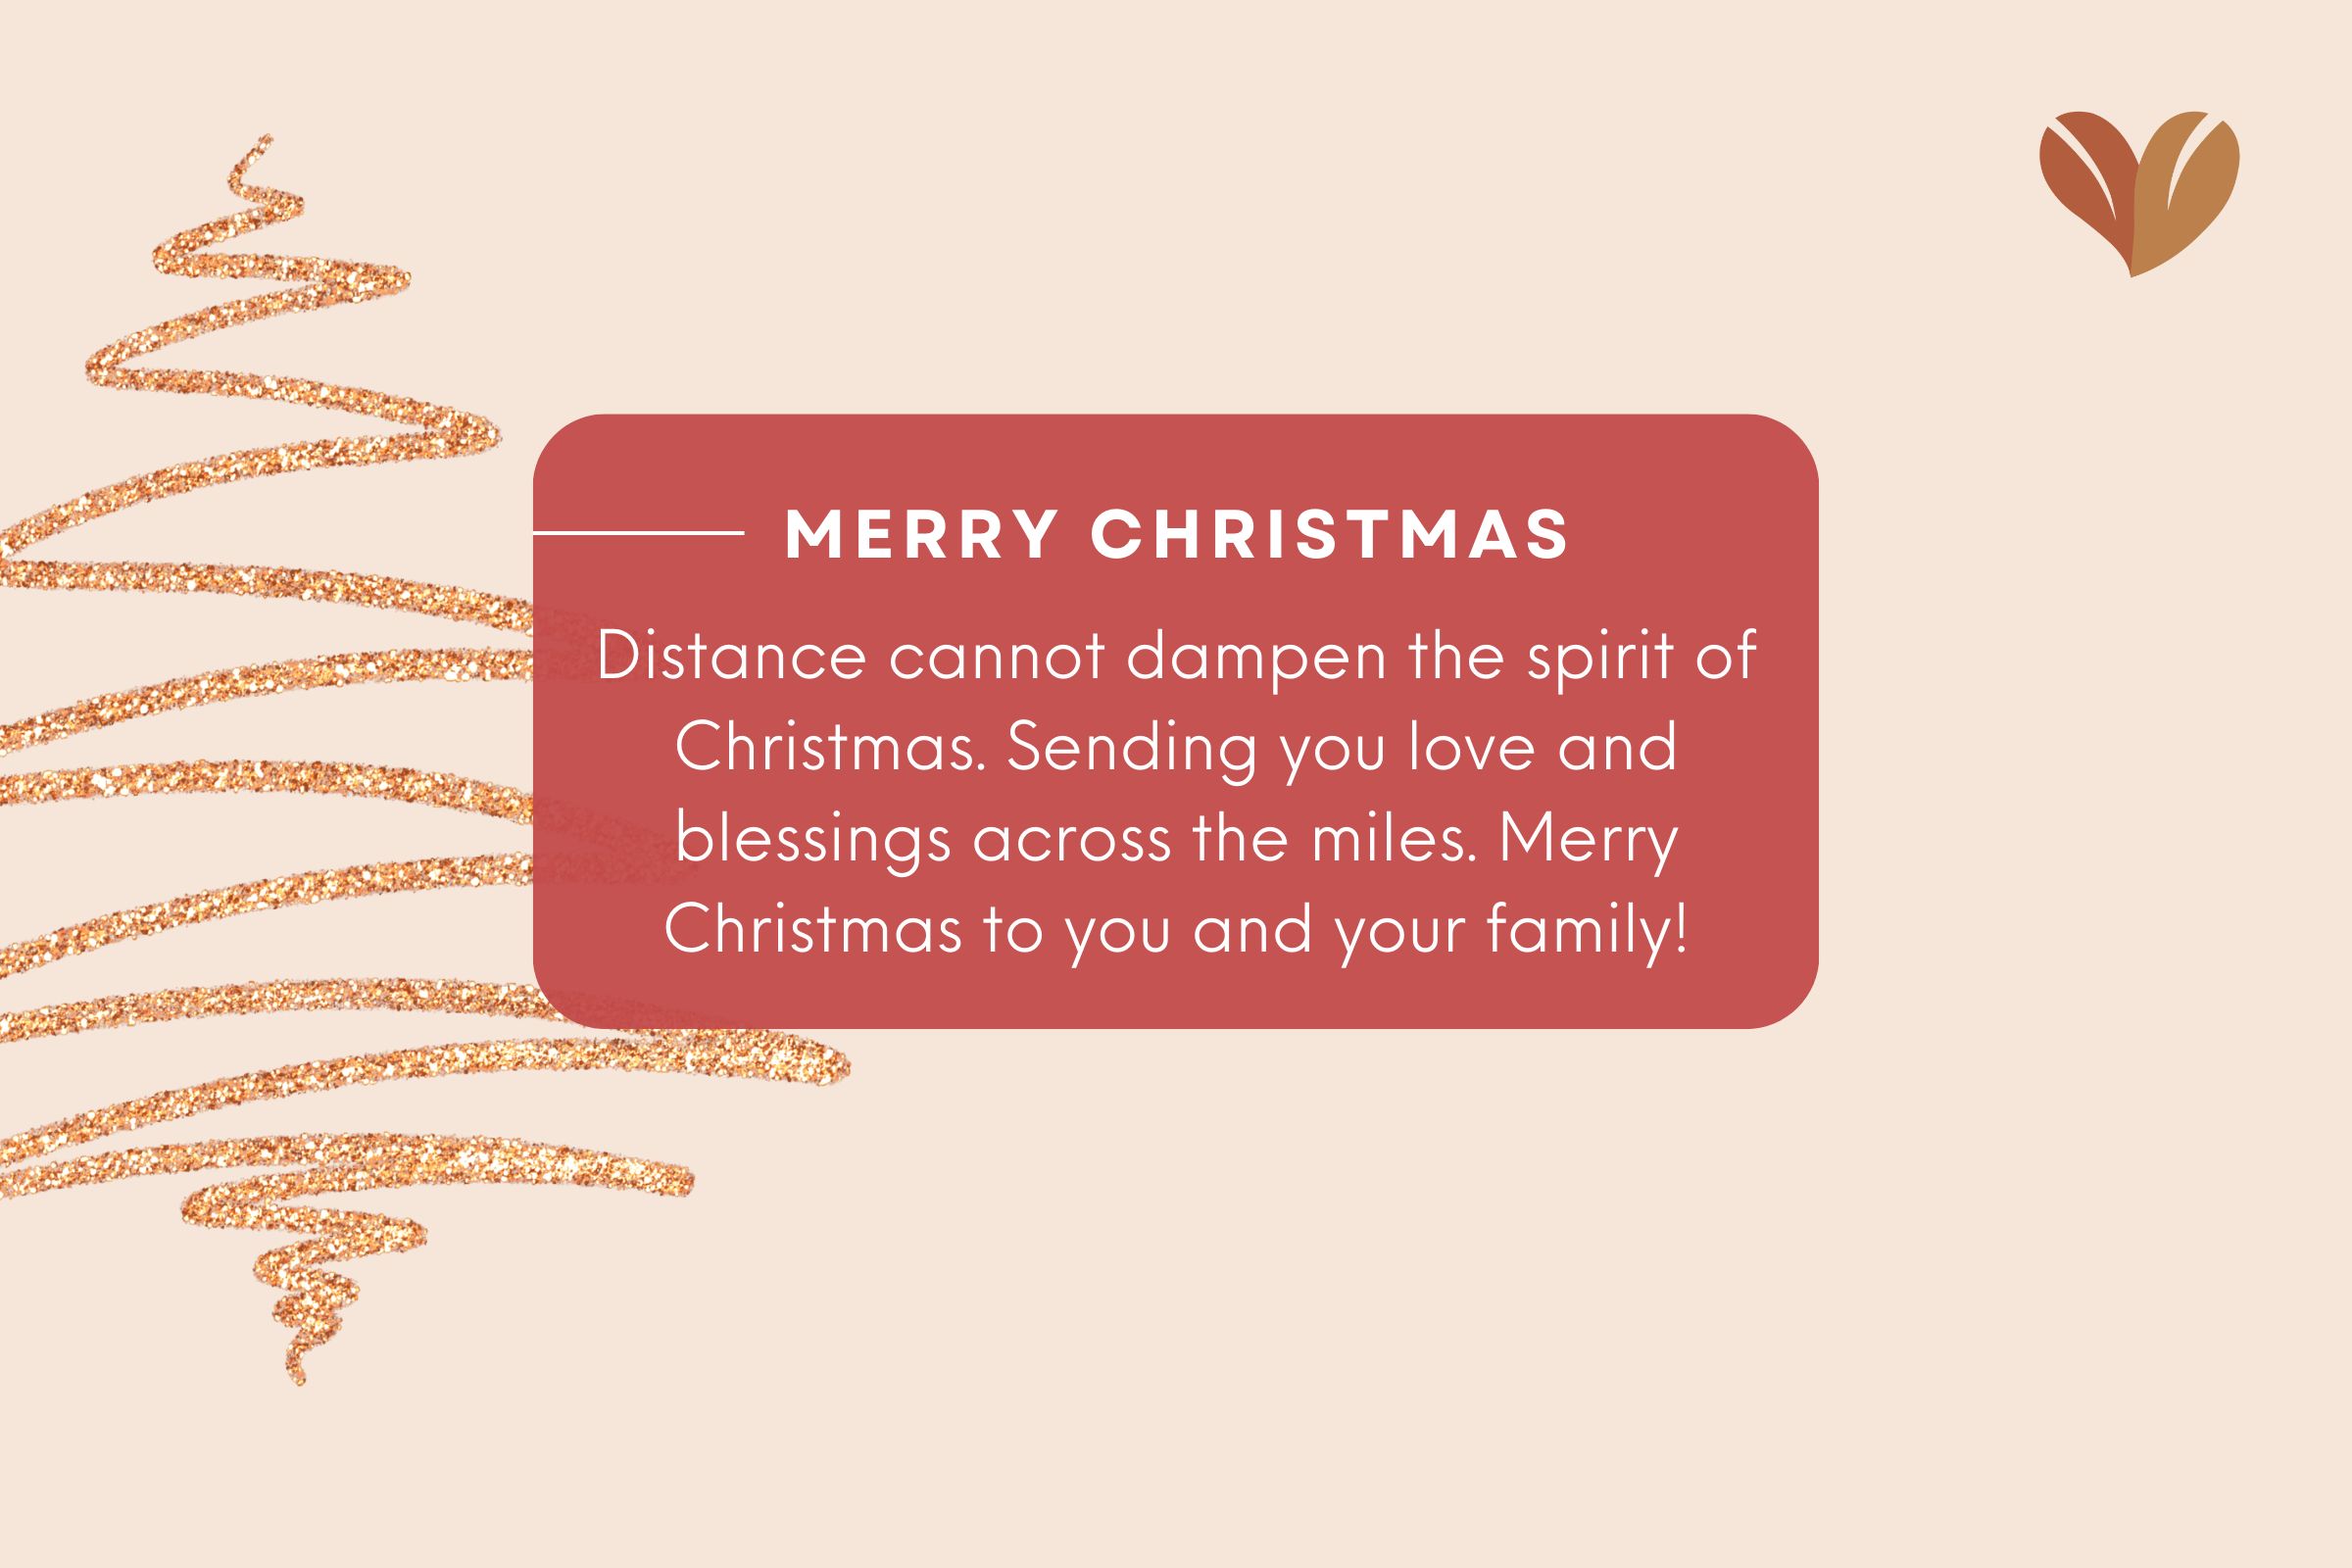 Heartfelt messages to send on Christmas time - Merry christmas from our family to yours